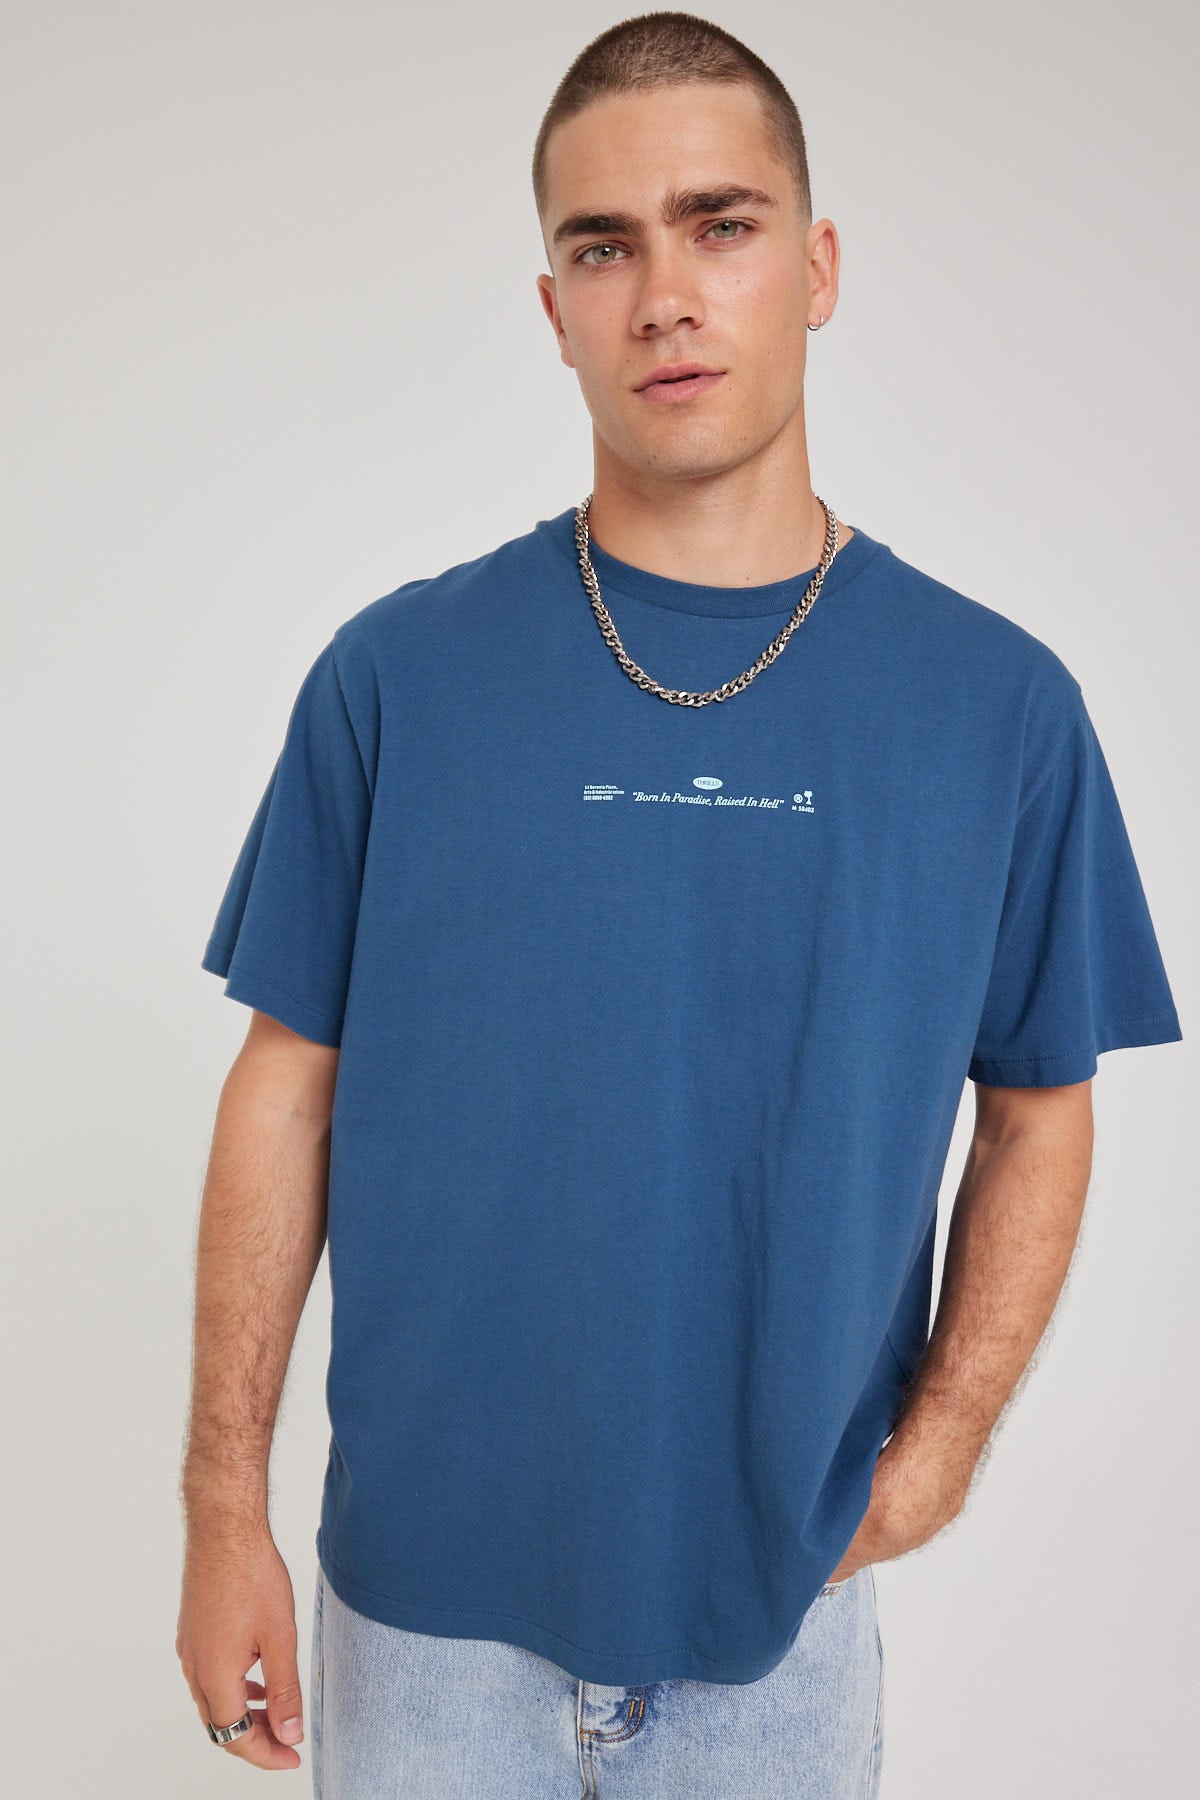 Thrills Natural Cooperation Merch Fit Tee New Teal – Universal Store